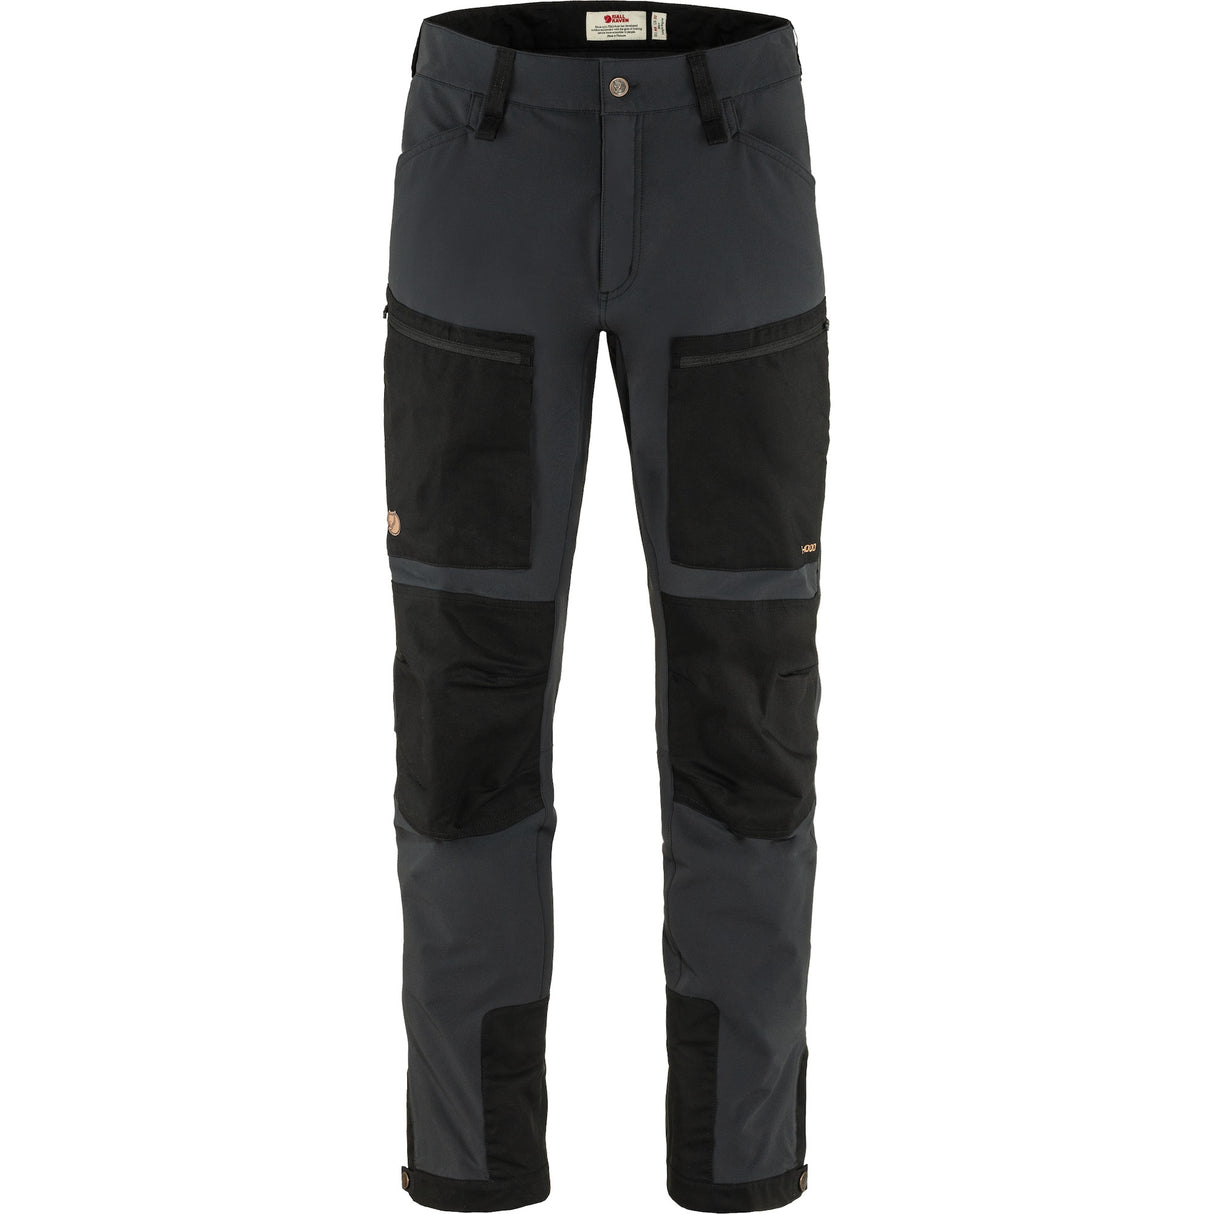 Fjallraven Keb Agile Trousers: Designed for optimal mobility and durability.